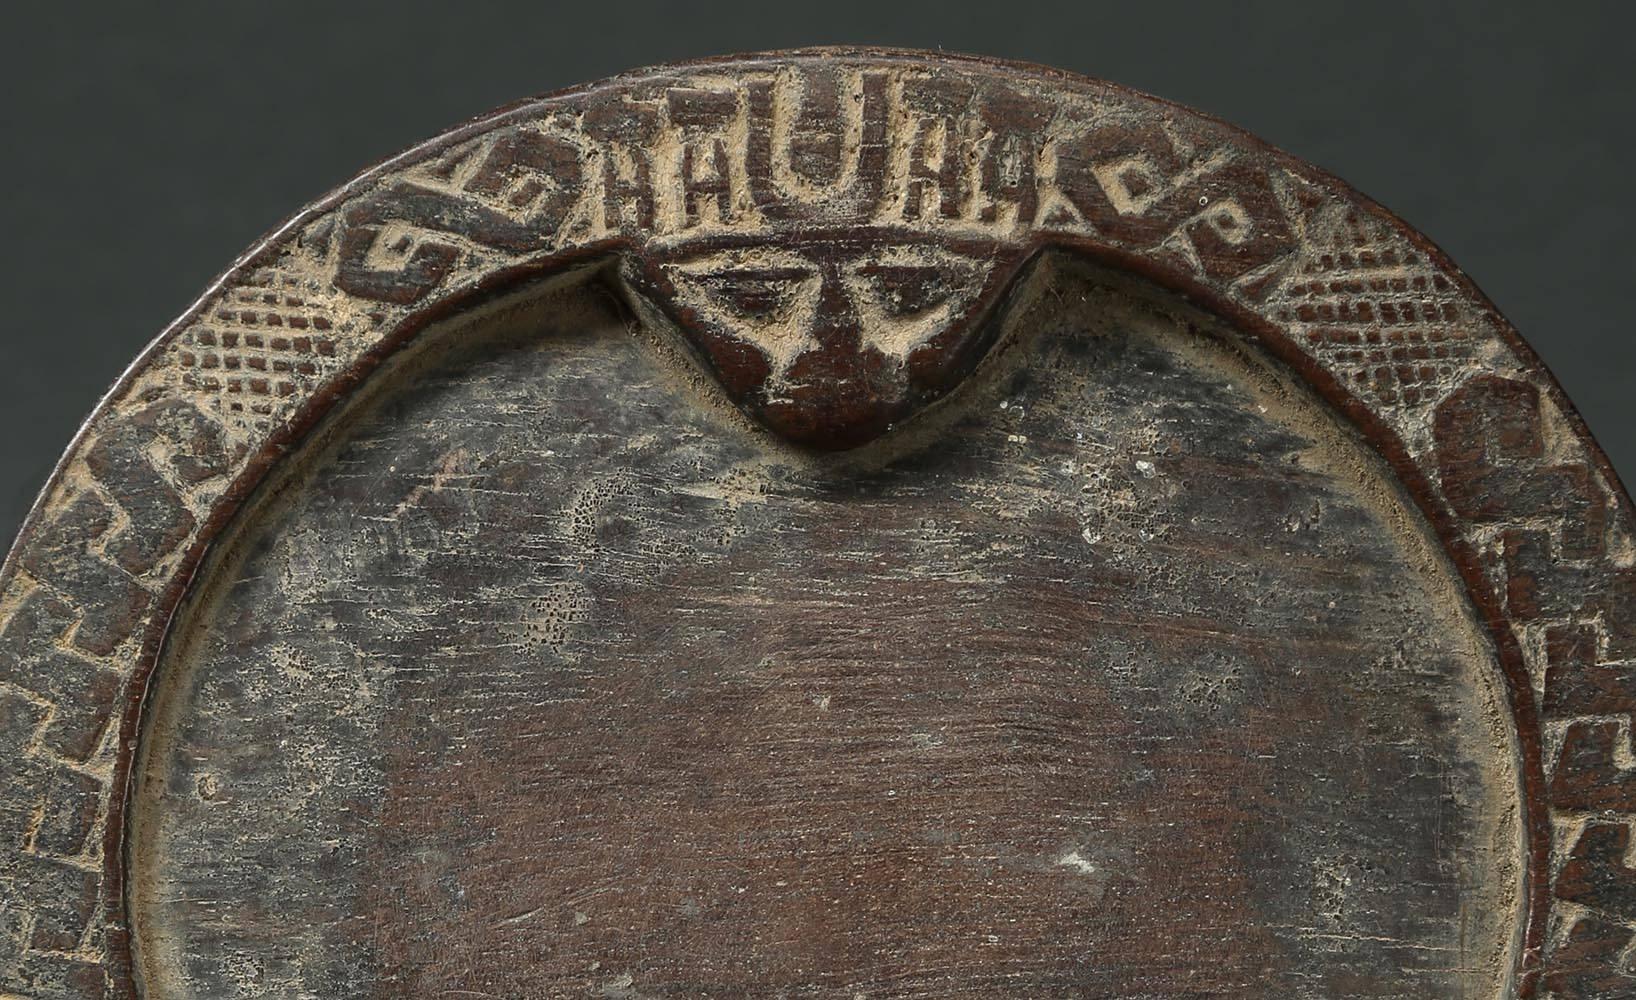 Offered by Scott McCue
Yoruba miniature tribal divination plate, Nigeria.

Diviners among the Yoruba People of Nigeria use plates on which they cast items and read the results. This is an unusually small very finely worked plate, 6 1/2